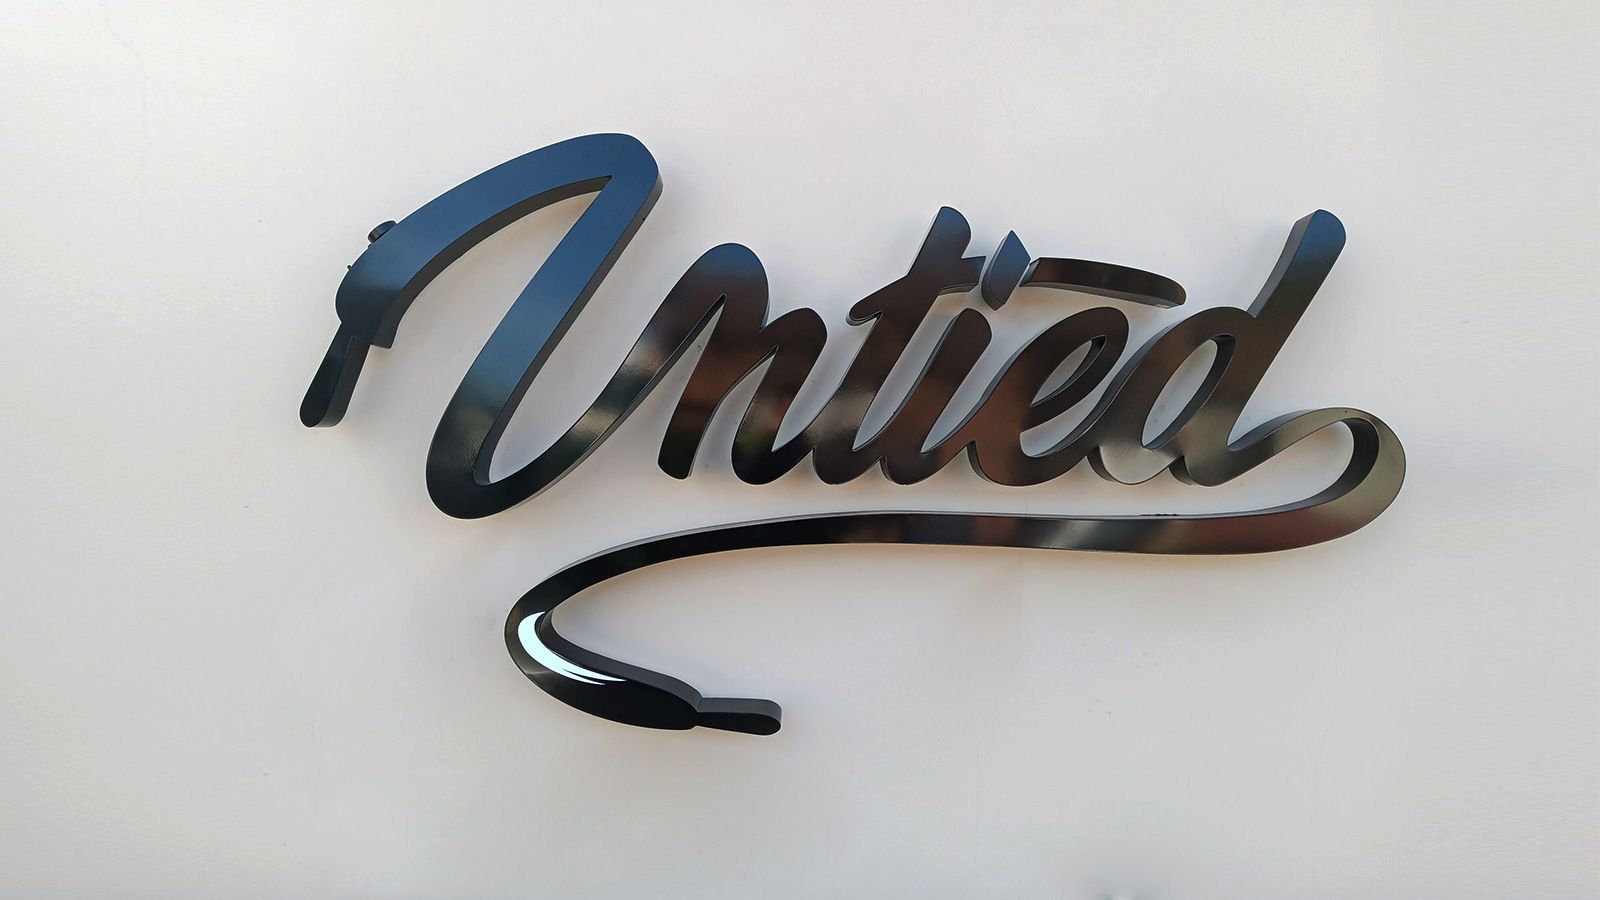 United channel letters